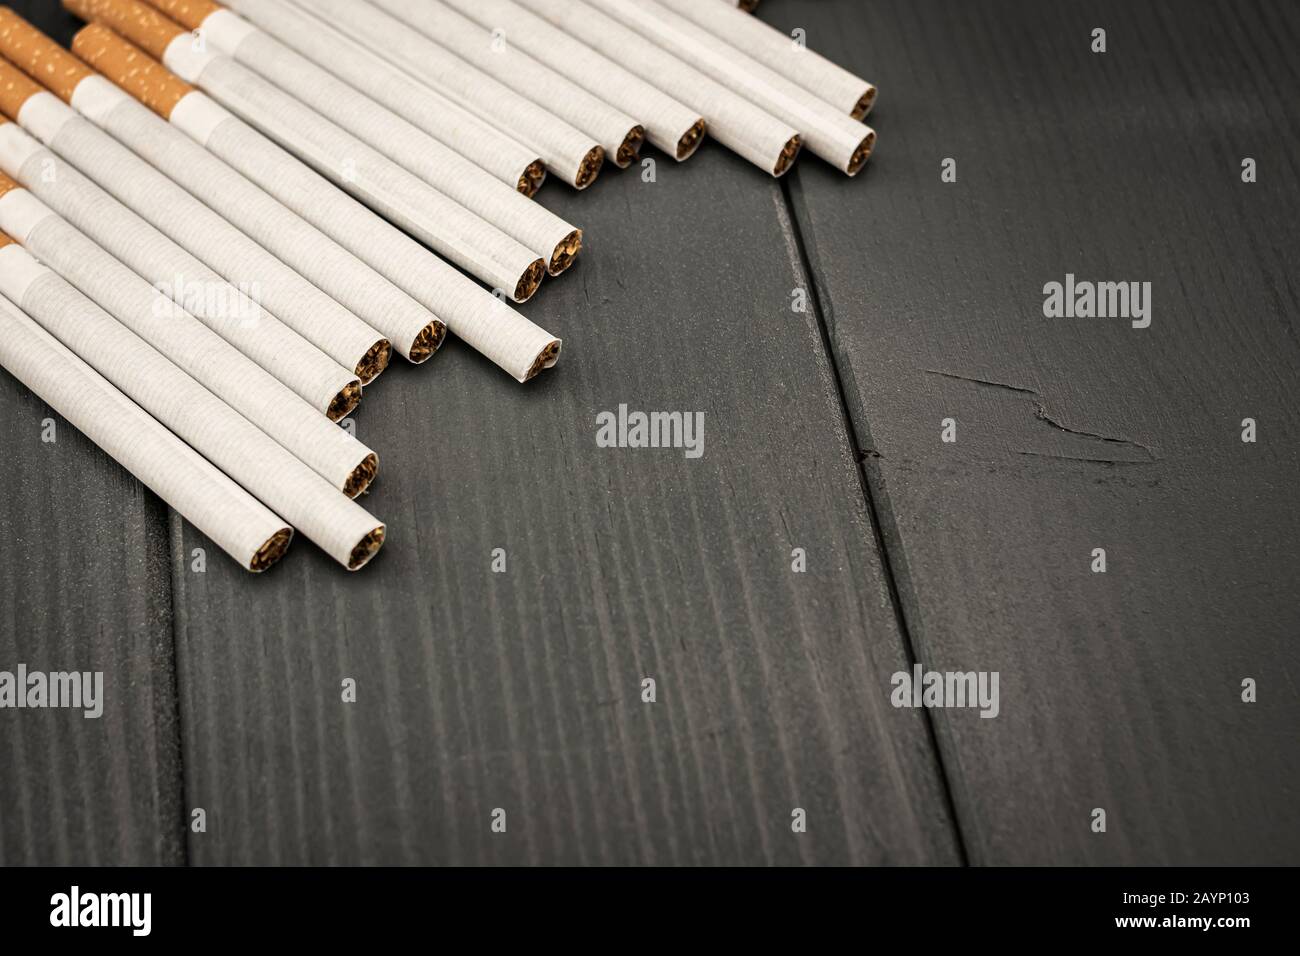 Tobacco cigarettes lined up in the upper left corner on gray wooden background Stock Photo